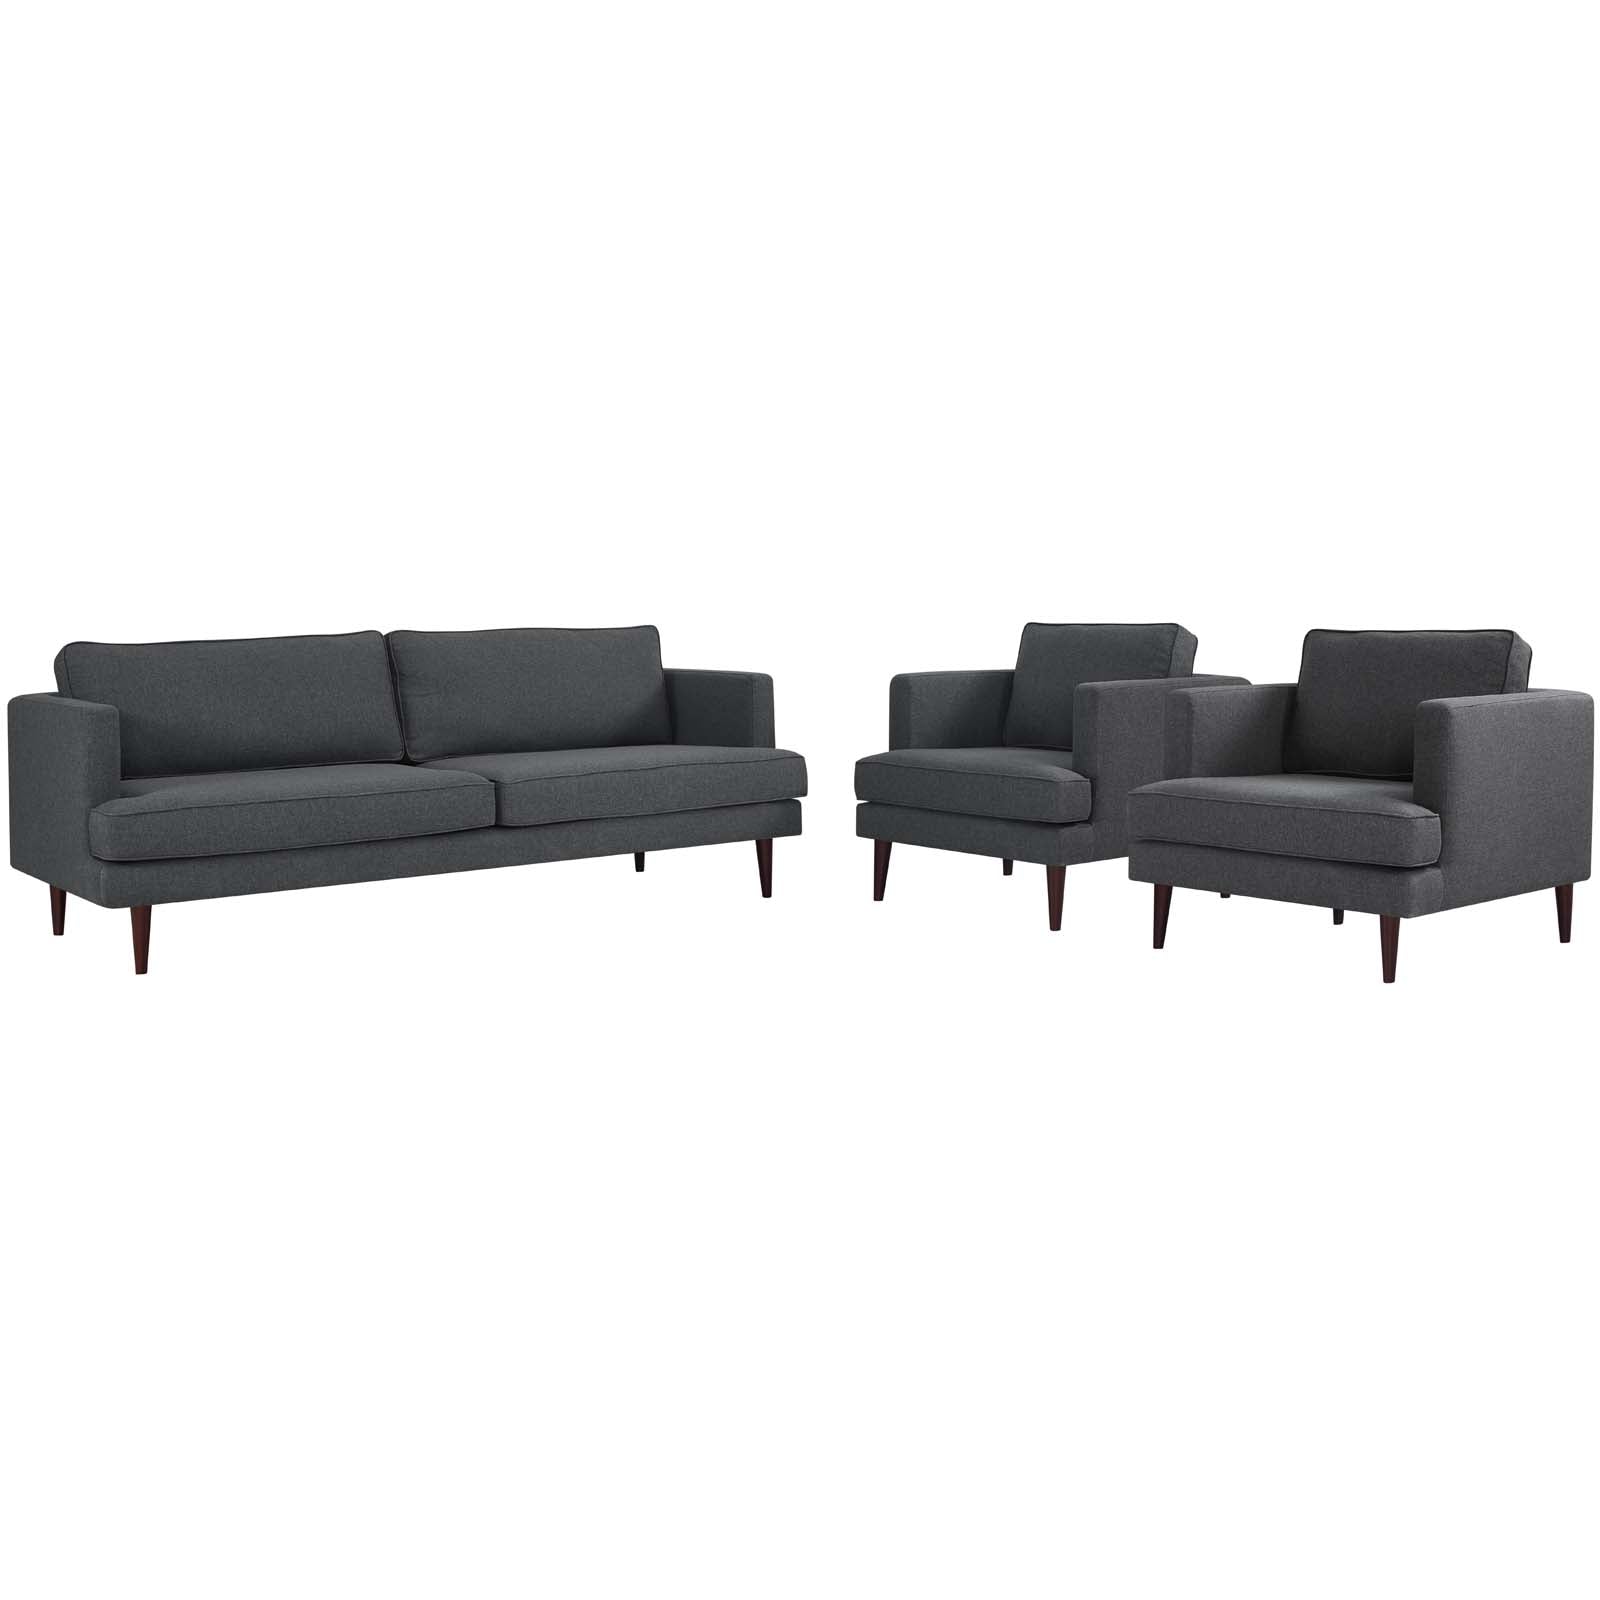 Modway Living Room Sets - Agile 3 Piece Upholstered Fabric Set Gray